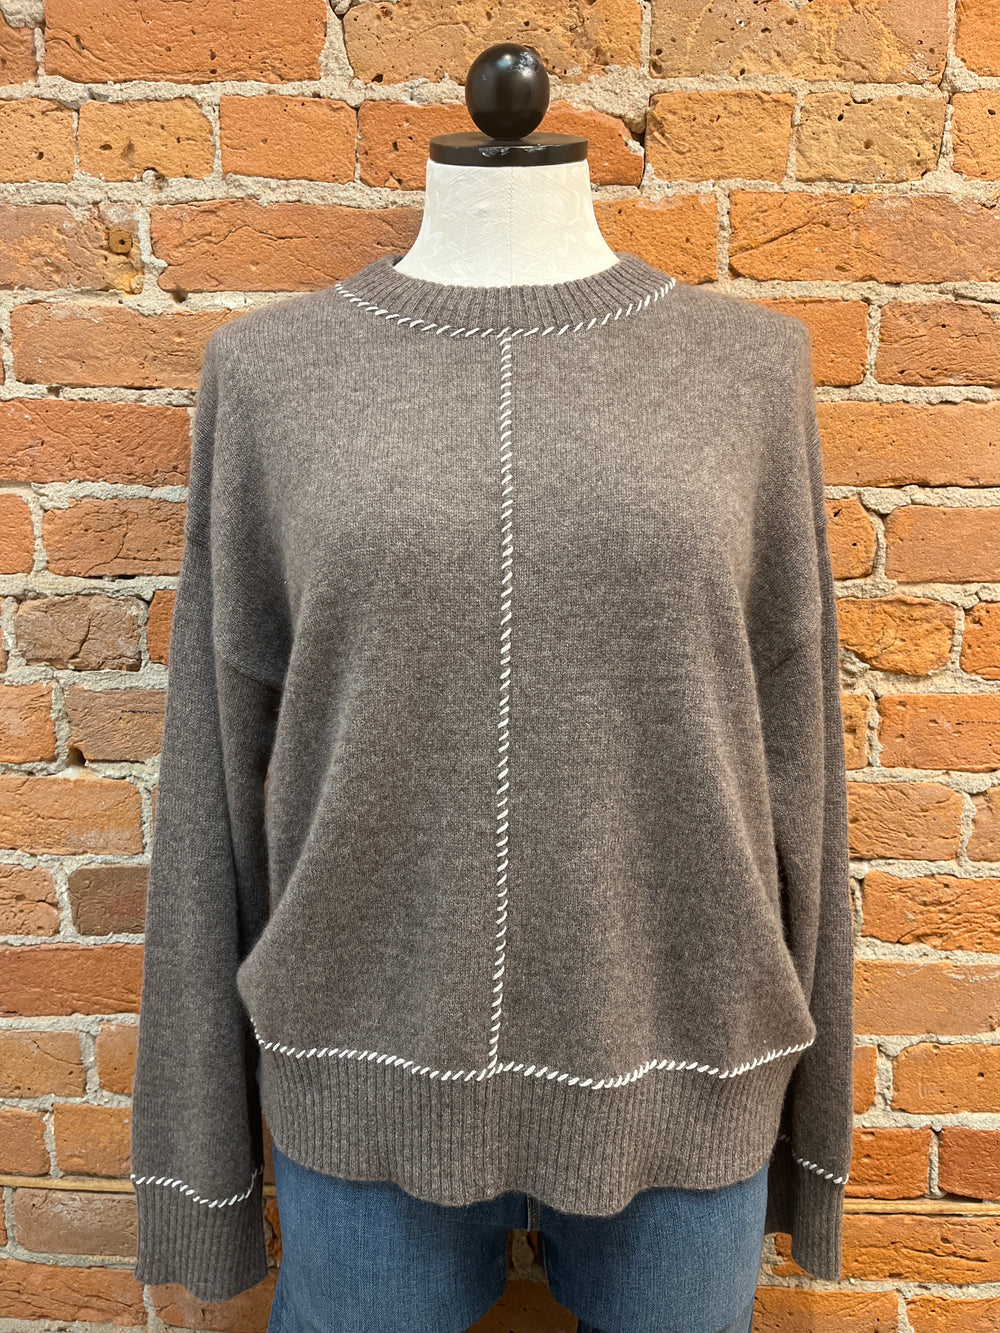 Alashan sweater, cashmere whip-stitch relaxed SALE Size L/XL